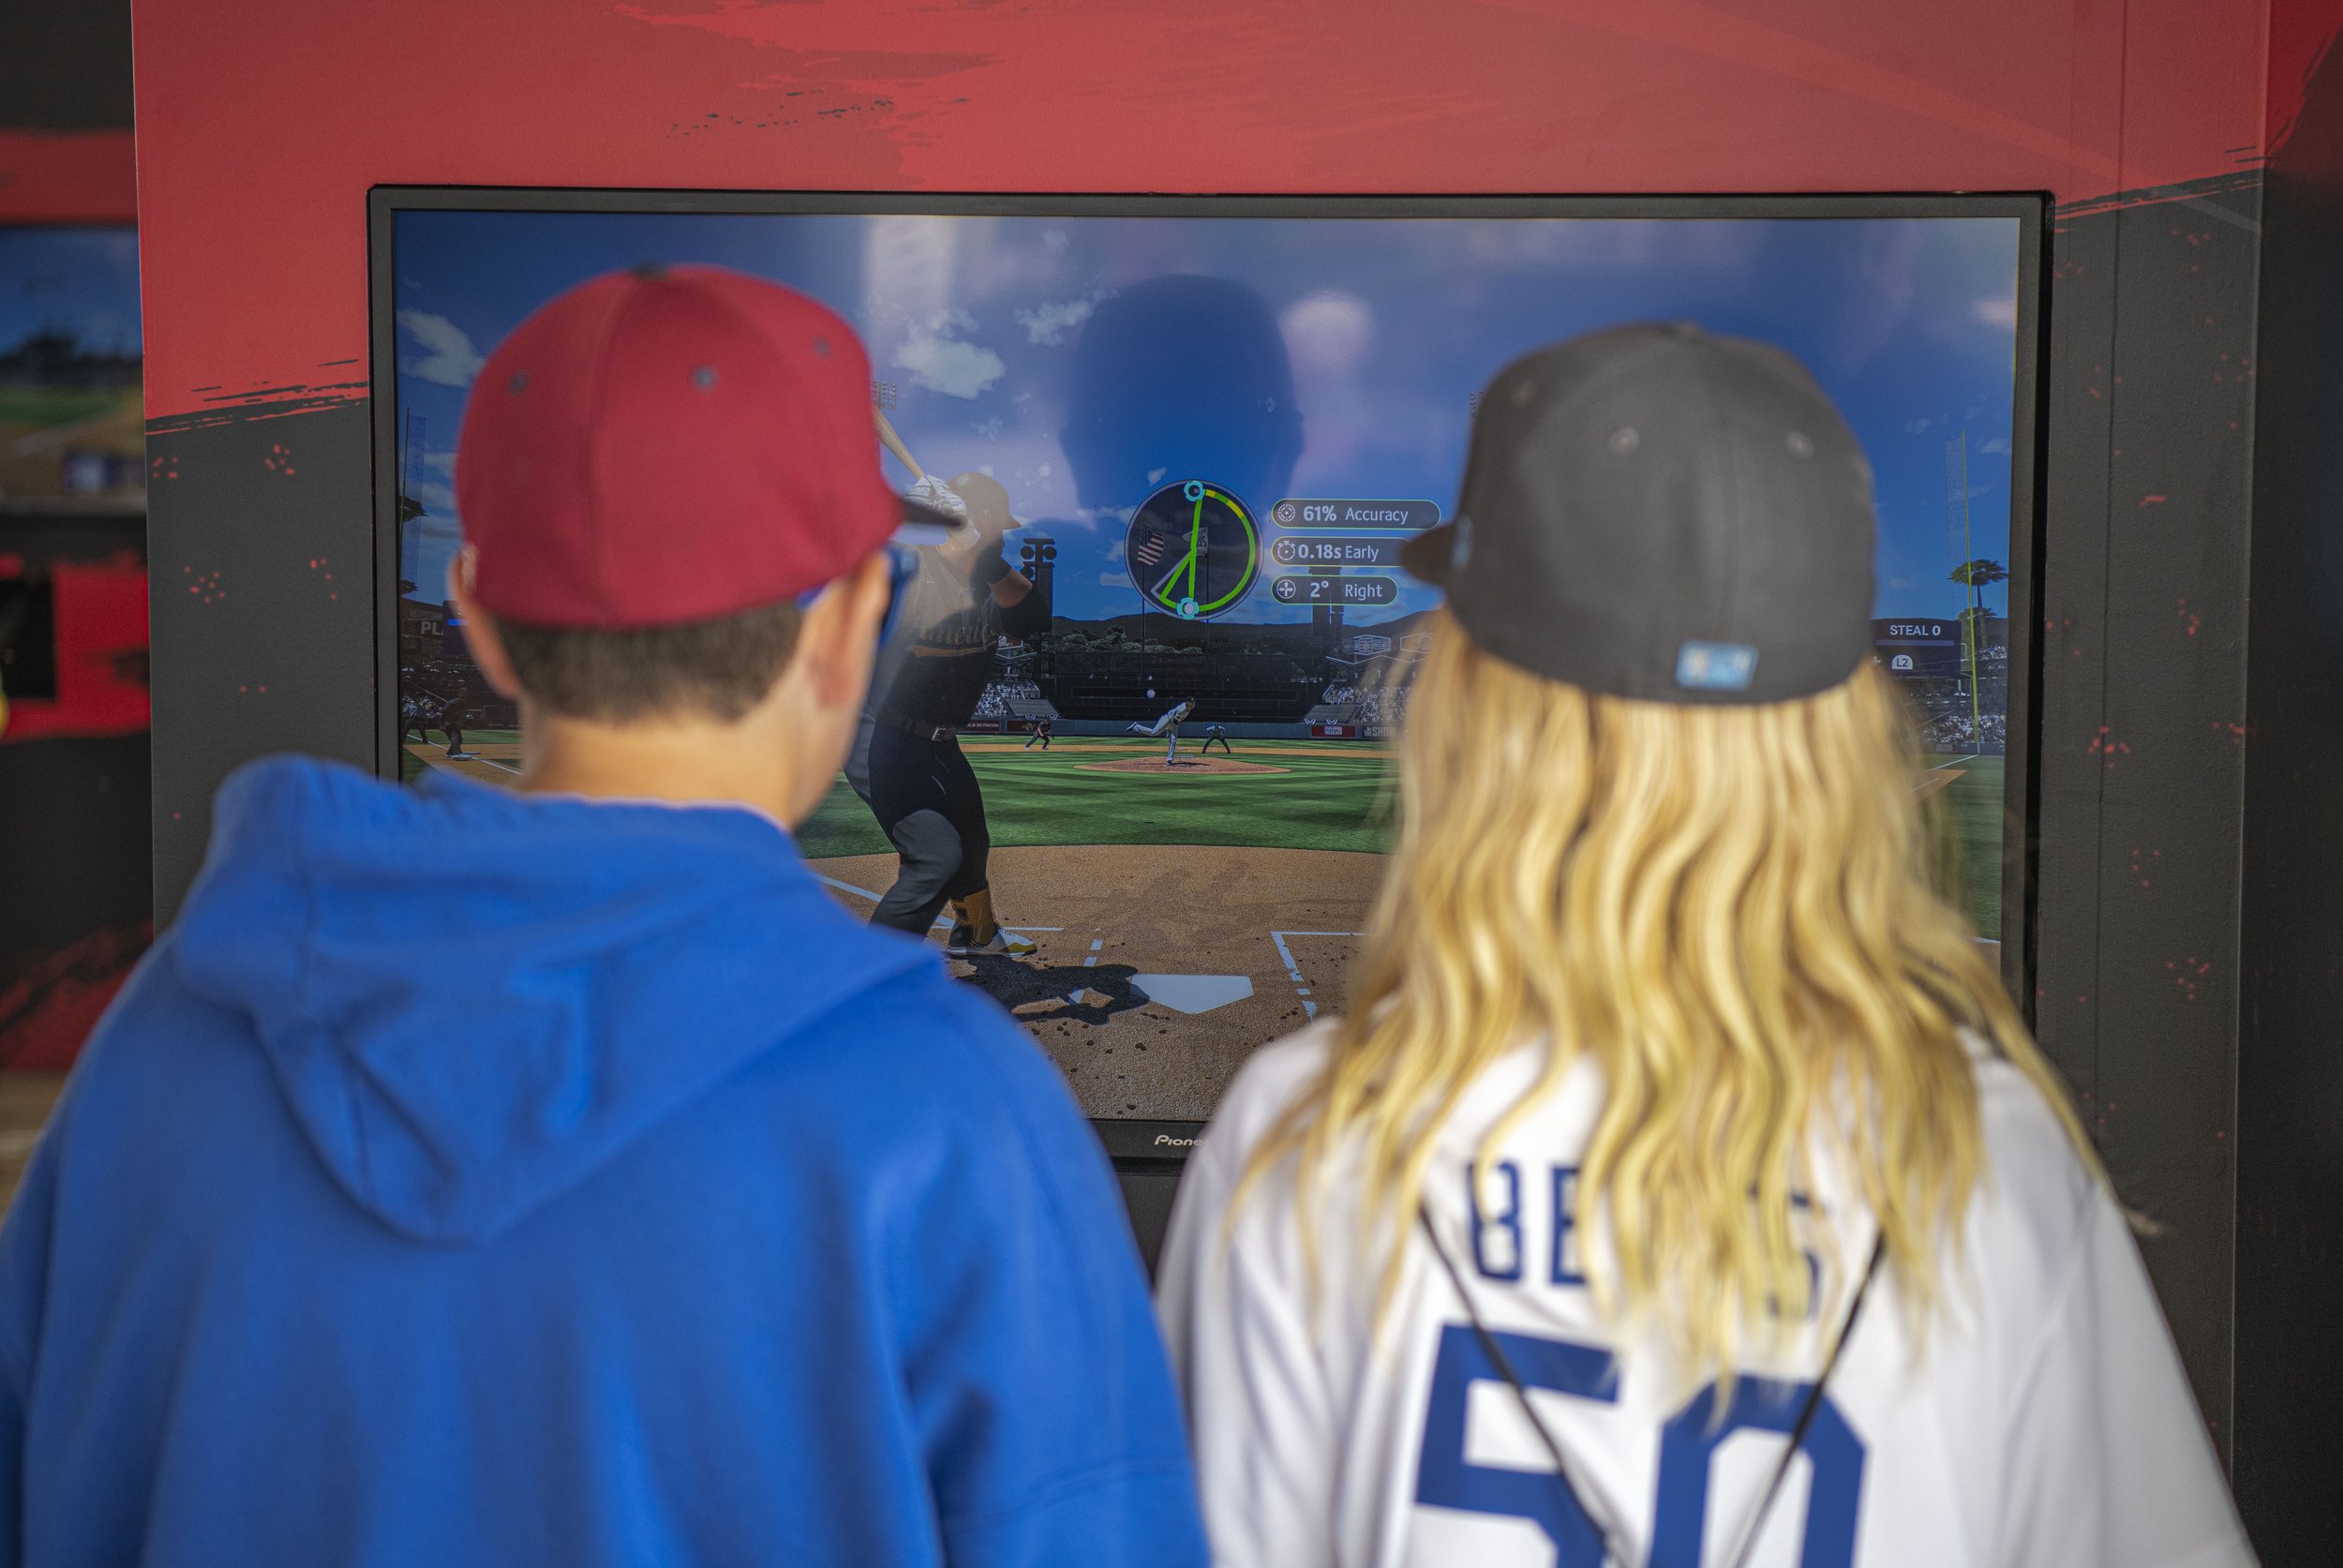  A couple young baseball fans battle it out in the new MLB 2k23 video game at the MLB All Star weekend festivities. (Jon Putman | The Corsair) 